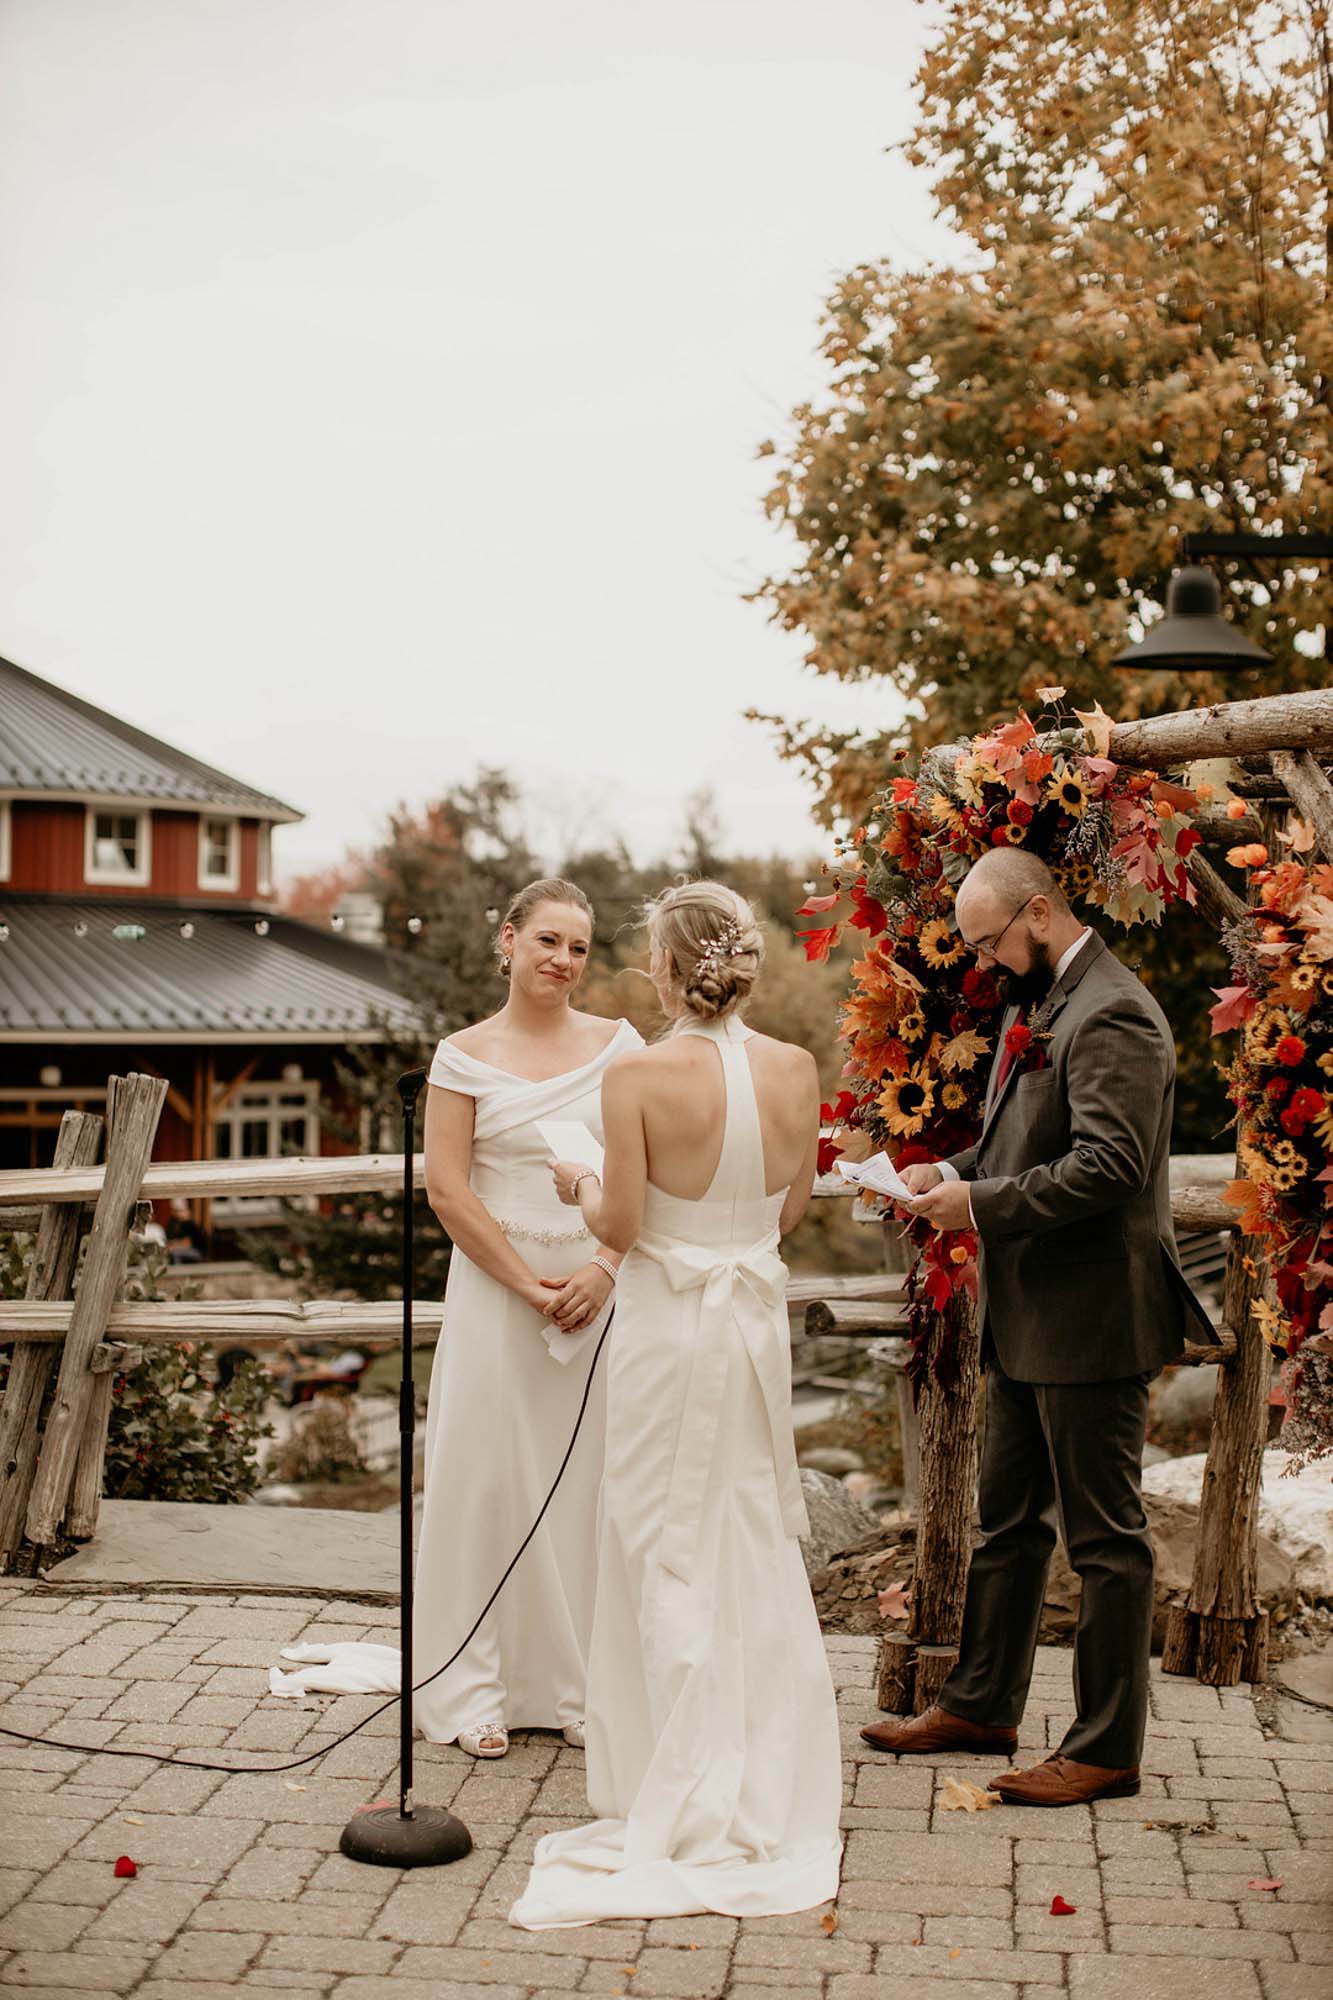 An intimate mountain wedding after a romantic double proposal | Seas mtns co | Featured on Equally Wed, the leading LGBTQ+ wedding magazine